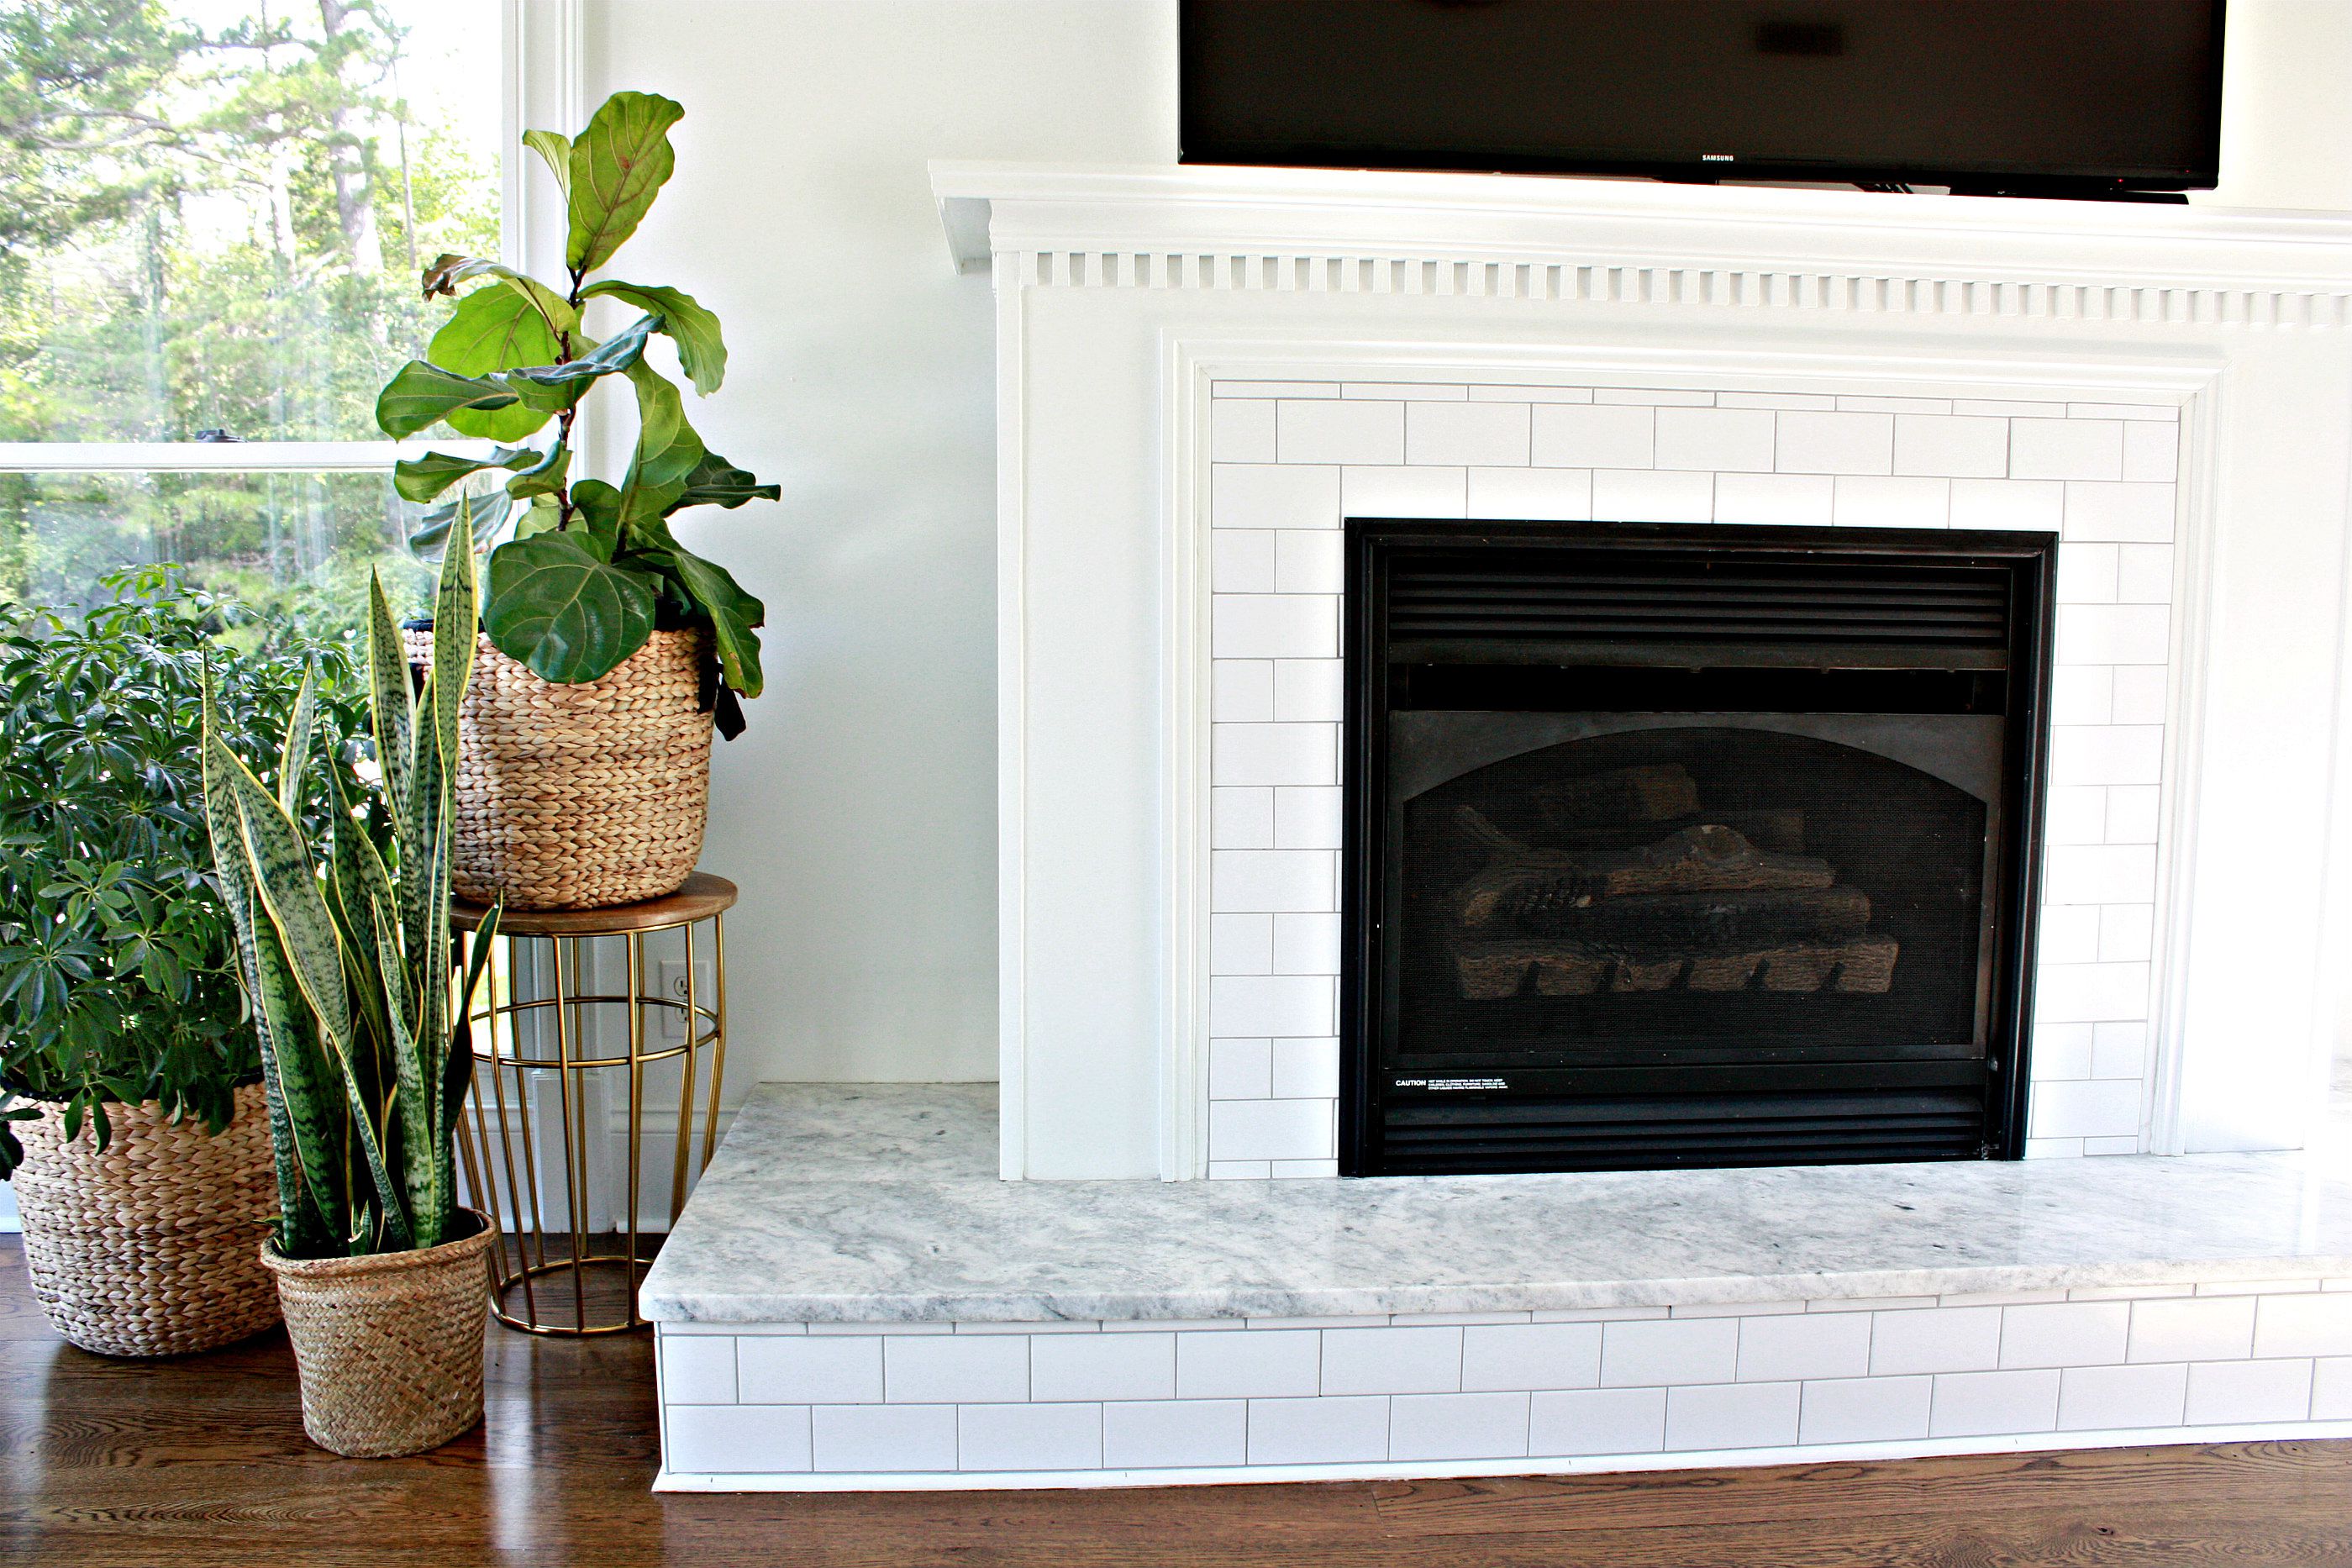 Timber Mantels for Fireplaces Luxury 25 Beautifully Tiled Fireplaces